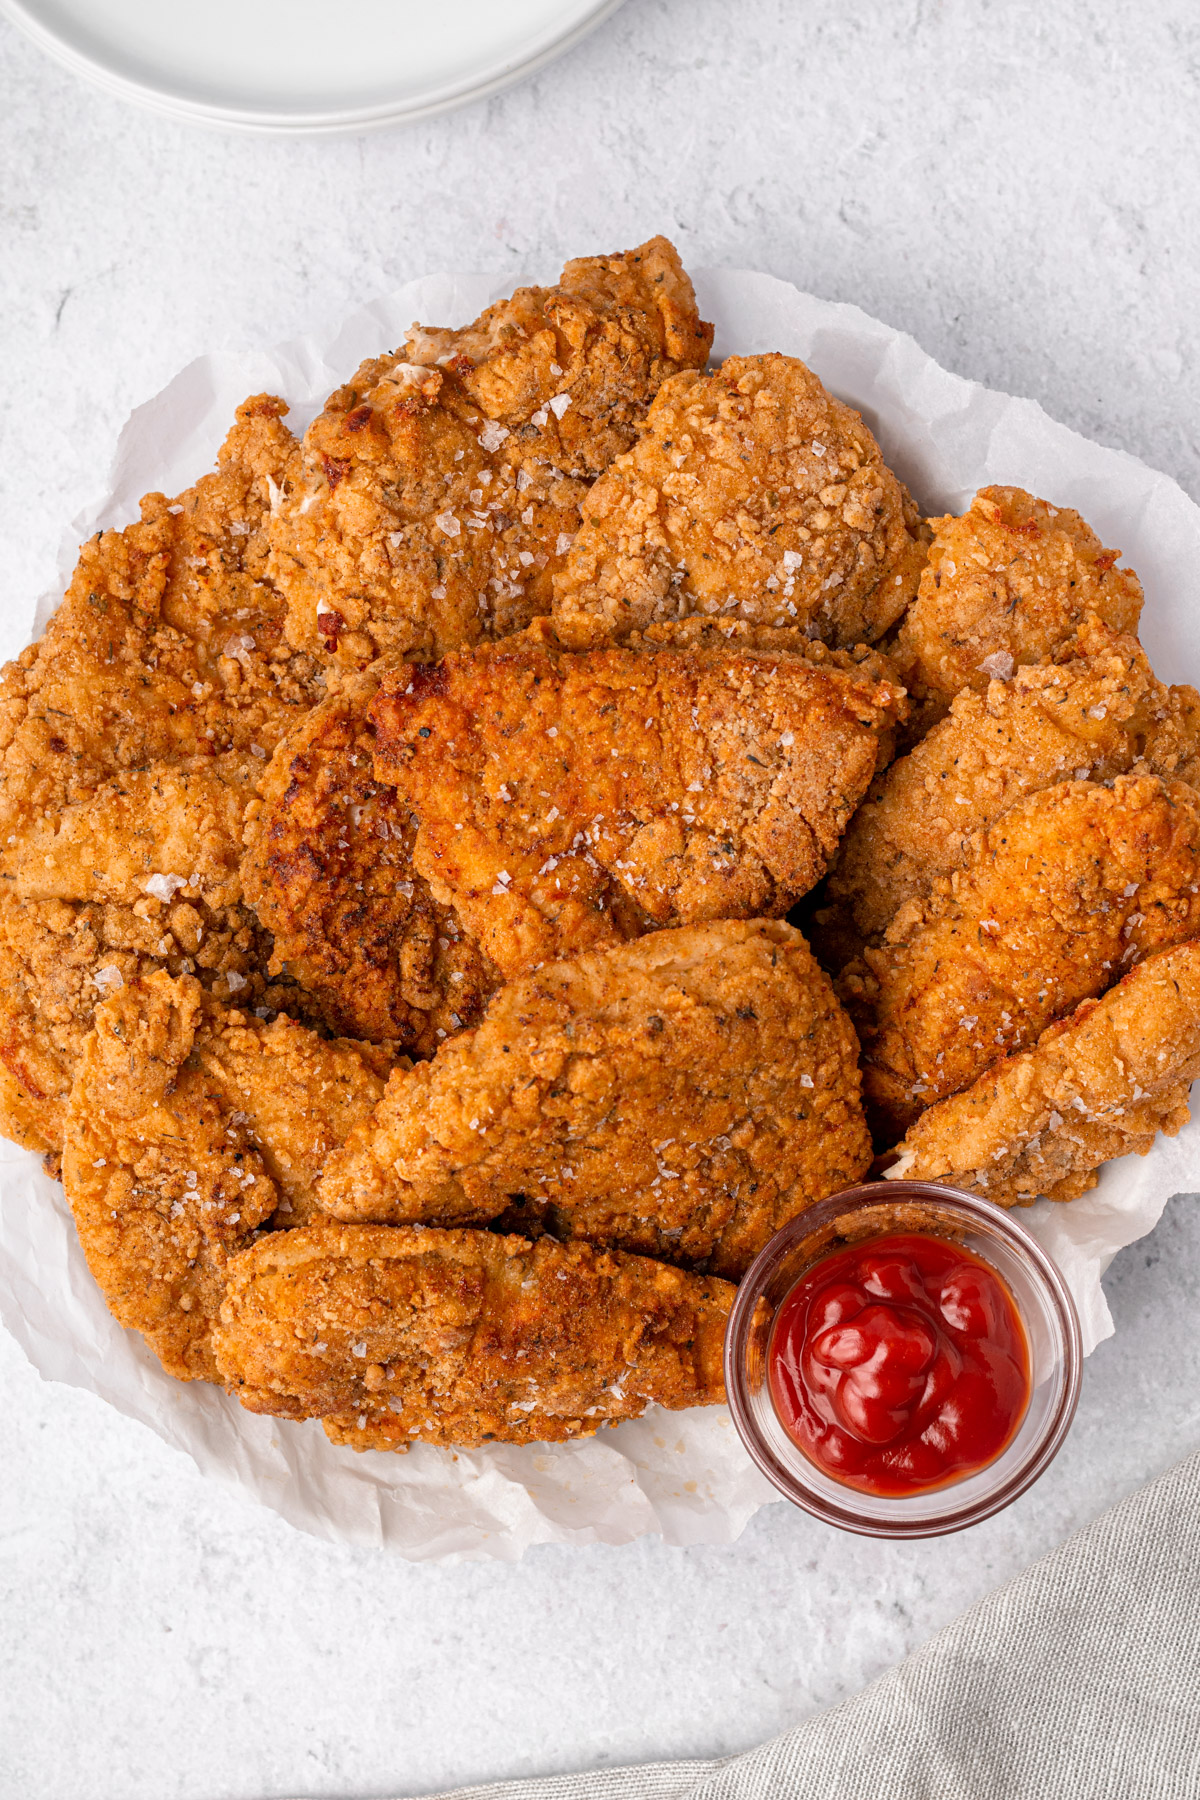 top view of gluten free fried chicken pieces on a plate